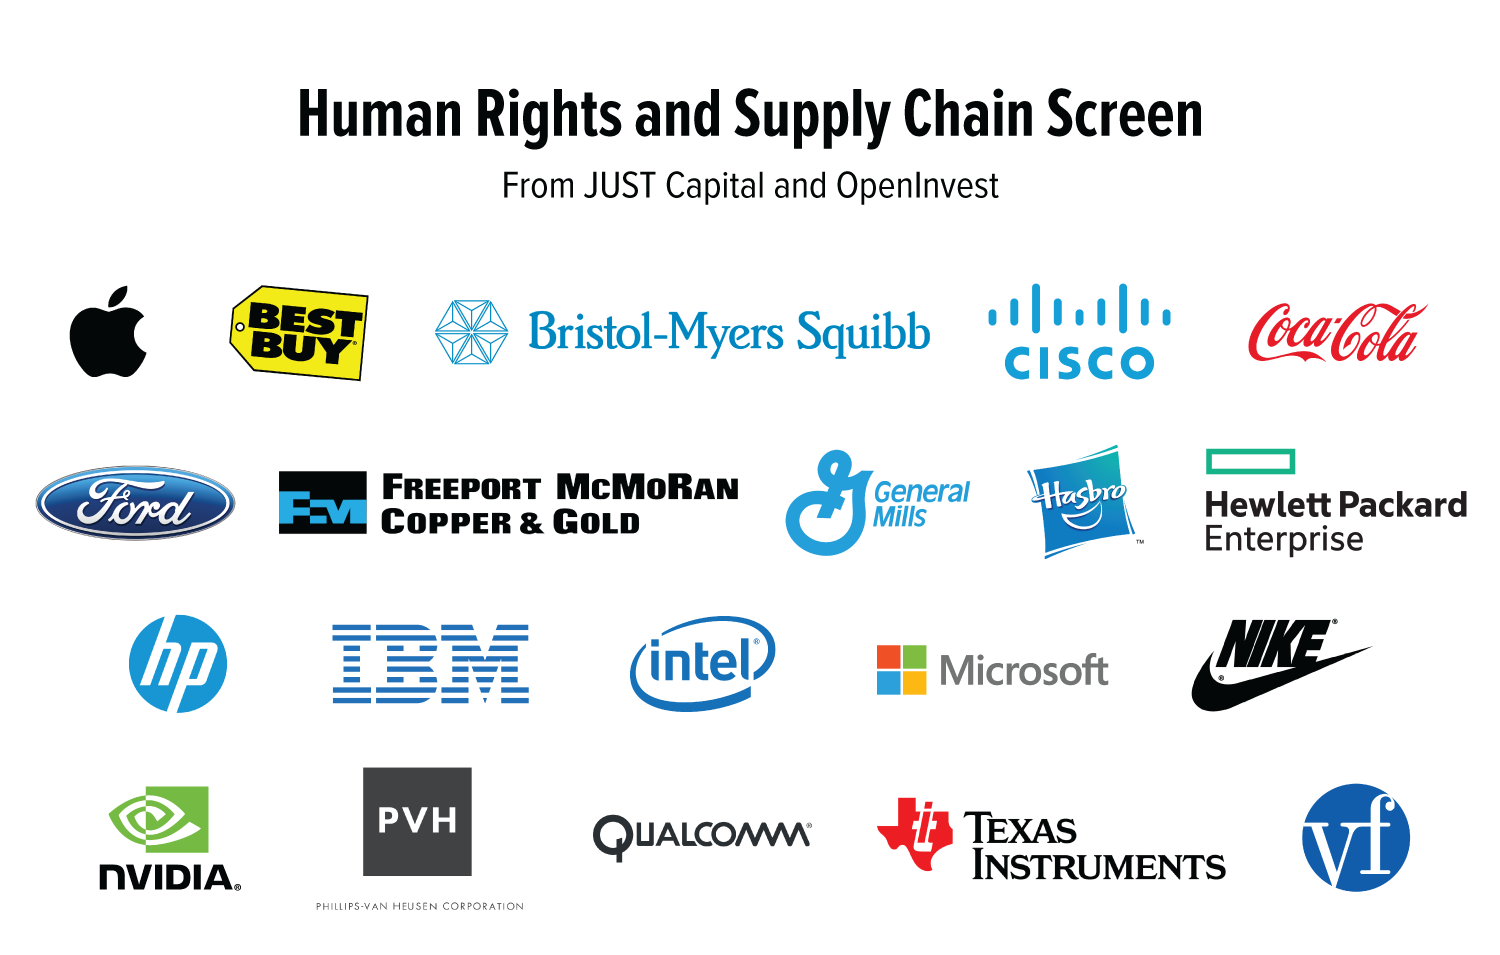 Human Rights and Supply Chain Screen